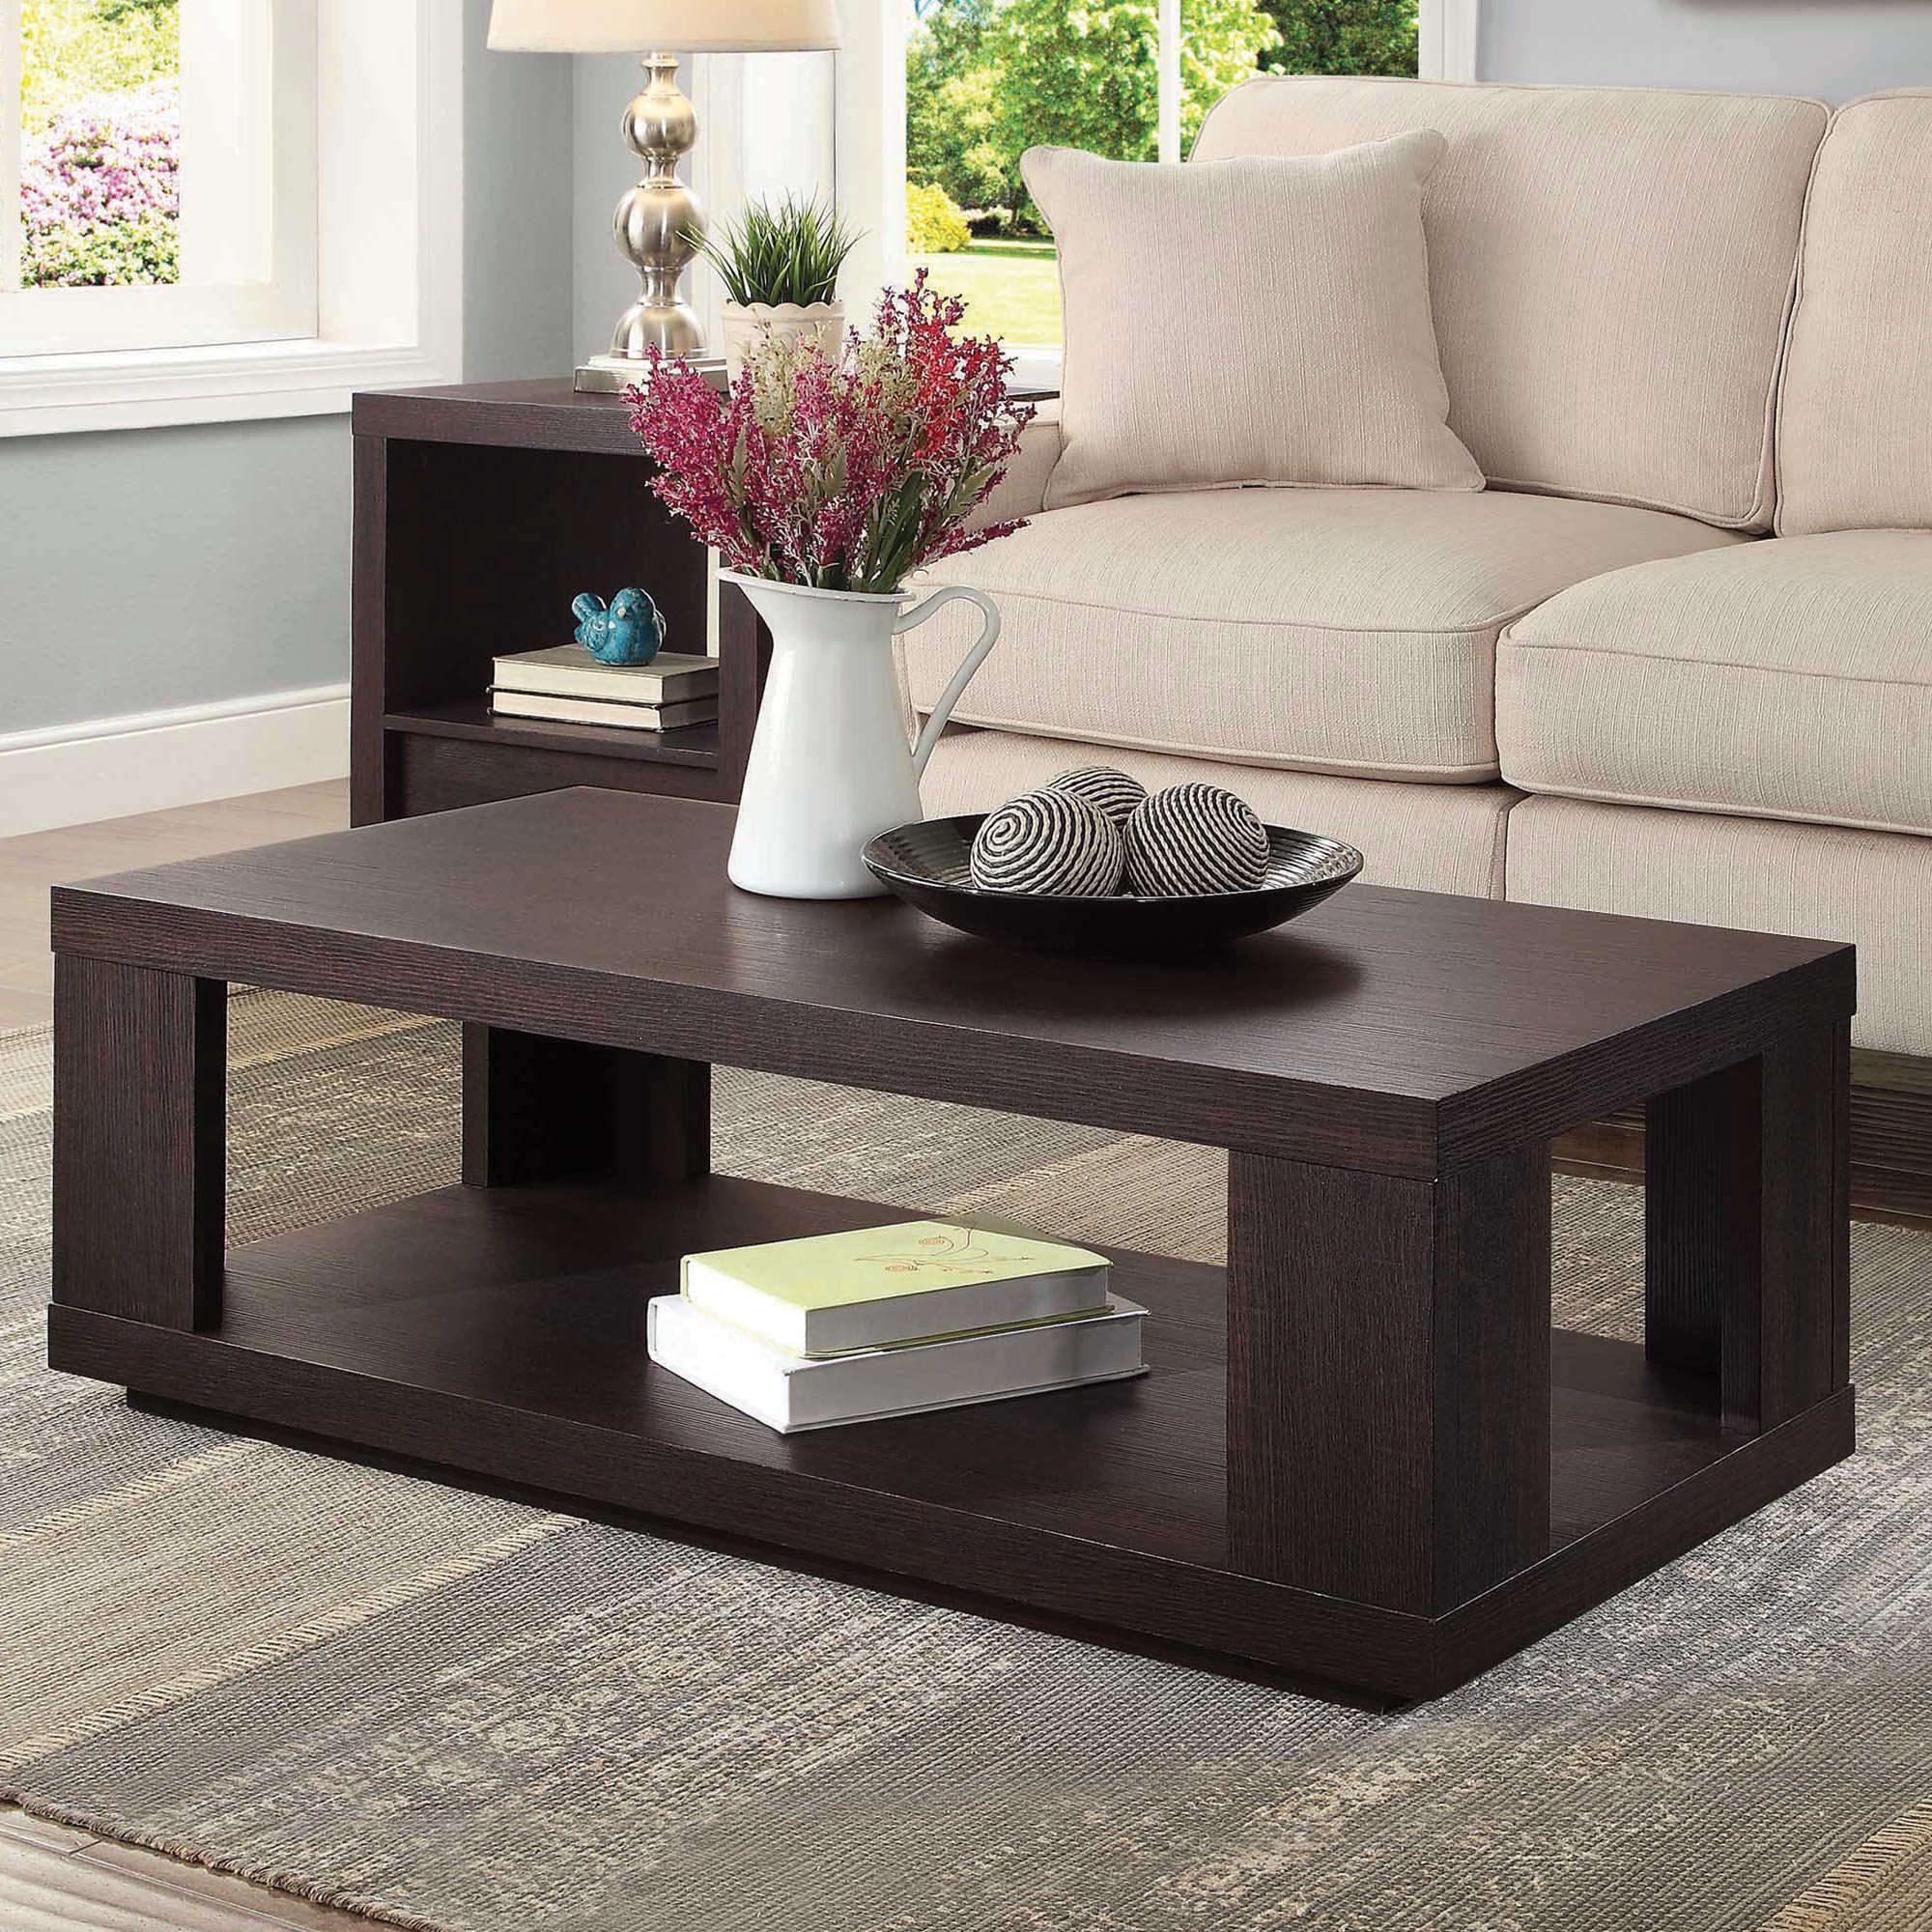 Widely Used Espresso Wood Finish Coffee Tables Regarding Better Homes & Gardens Steele Coffee Table With Lower Shelf, Espresso (Photo 13 of 15)